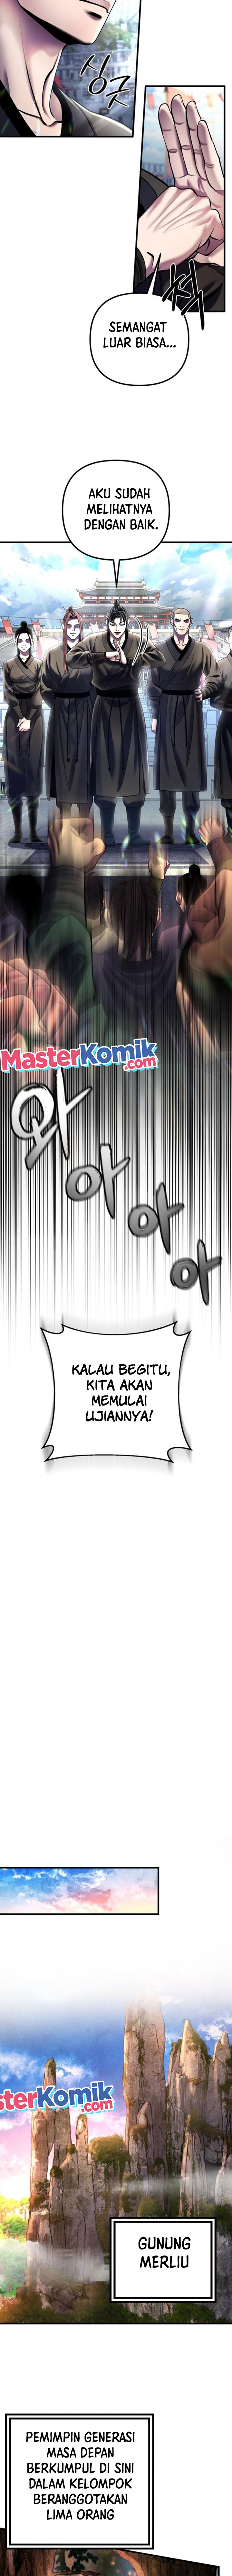 Ha Buk Paeng’s Youngest Son Chapter 98